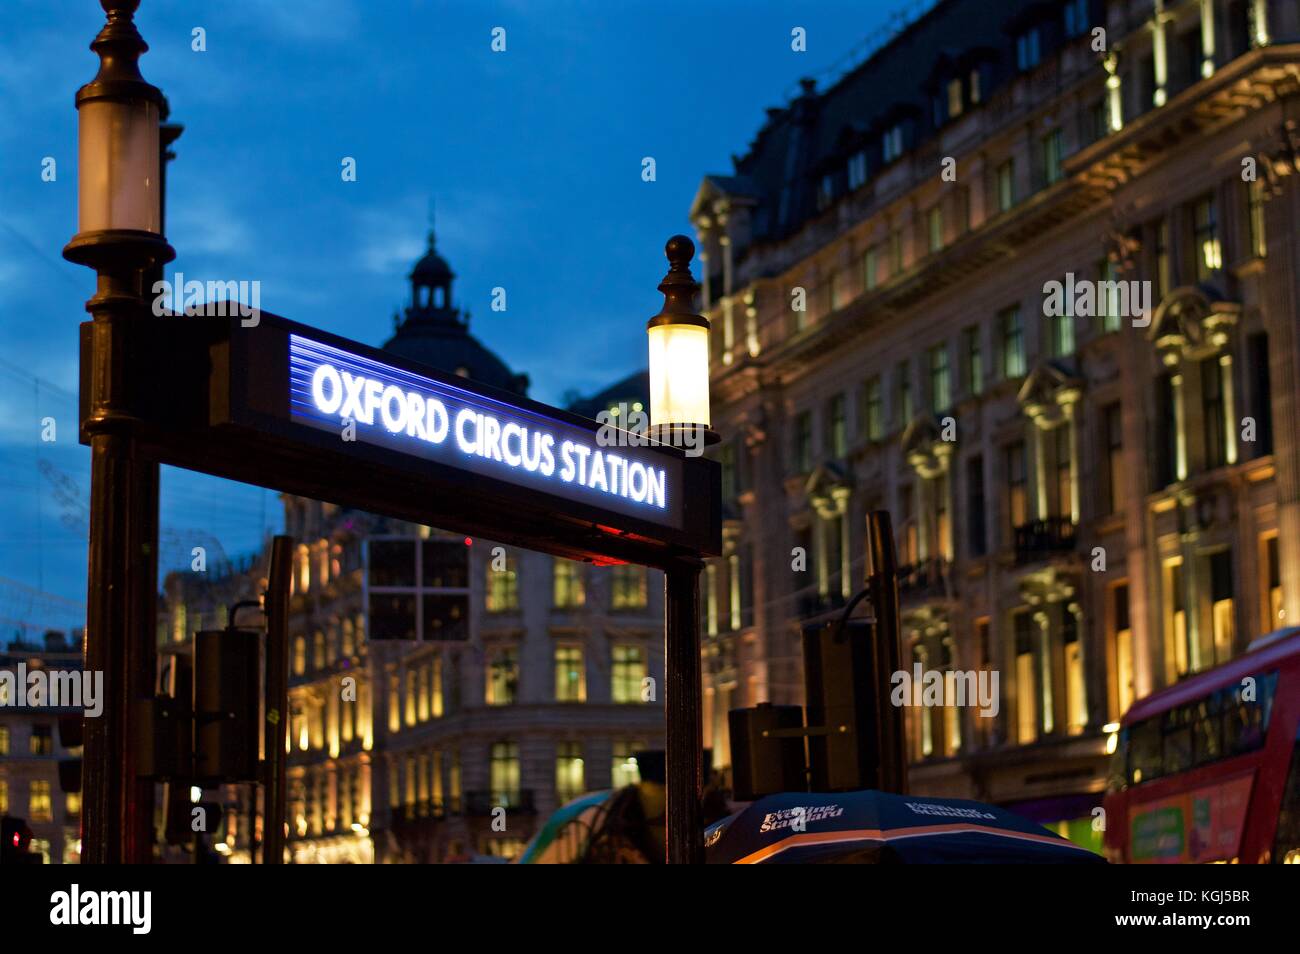 Oxford Circus Tube Station sign with Regent Street buildings in the background, night, London, UK Stock Photo